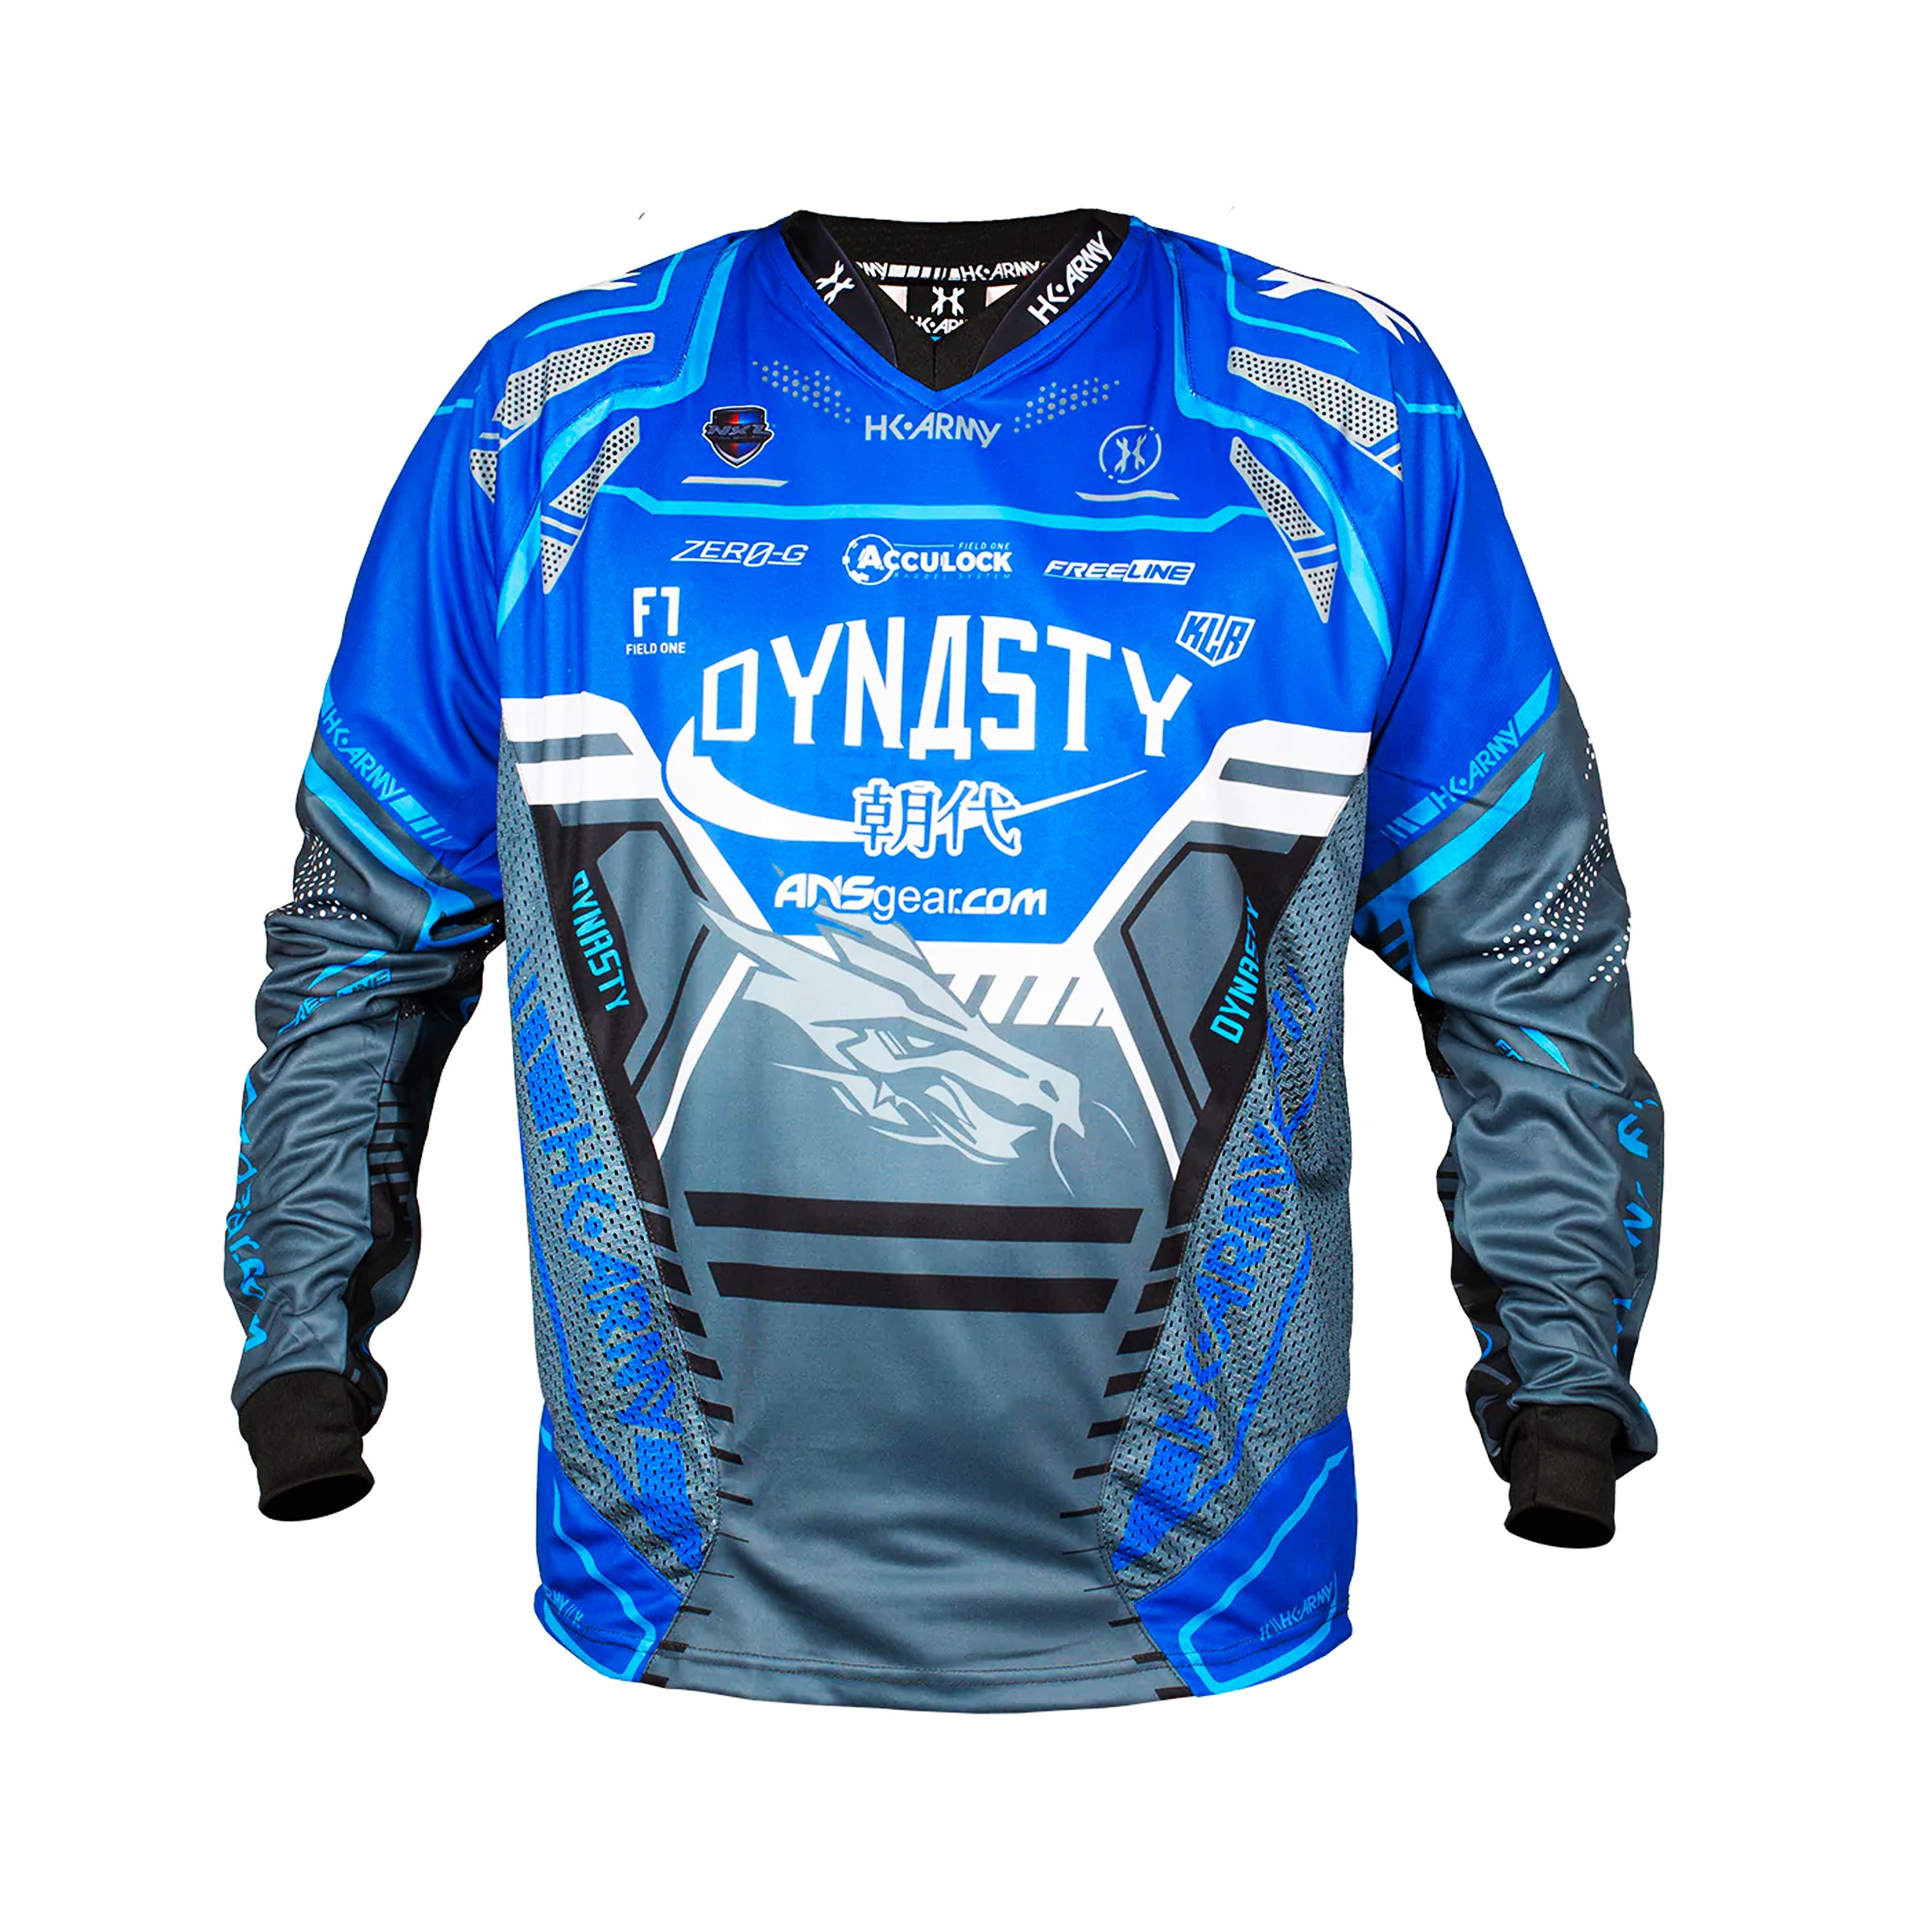 HK Army Streetball Paintball Jersey - Chicago NXL